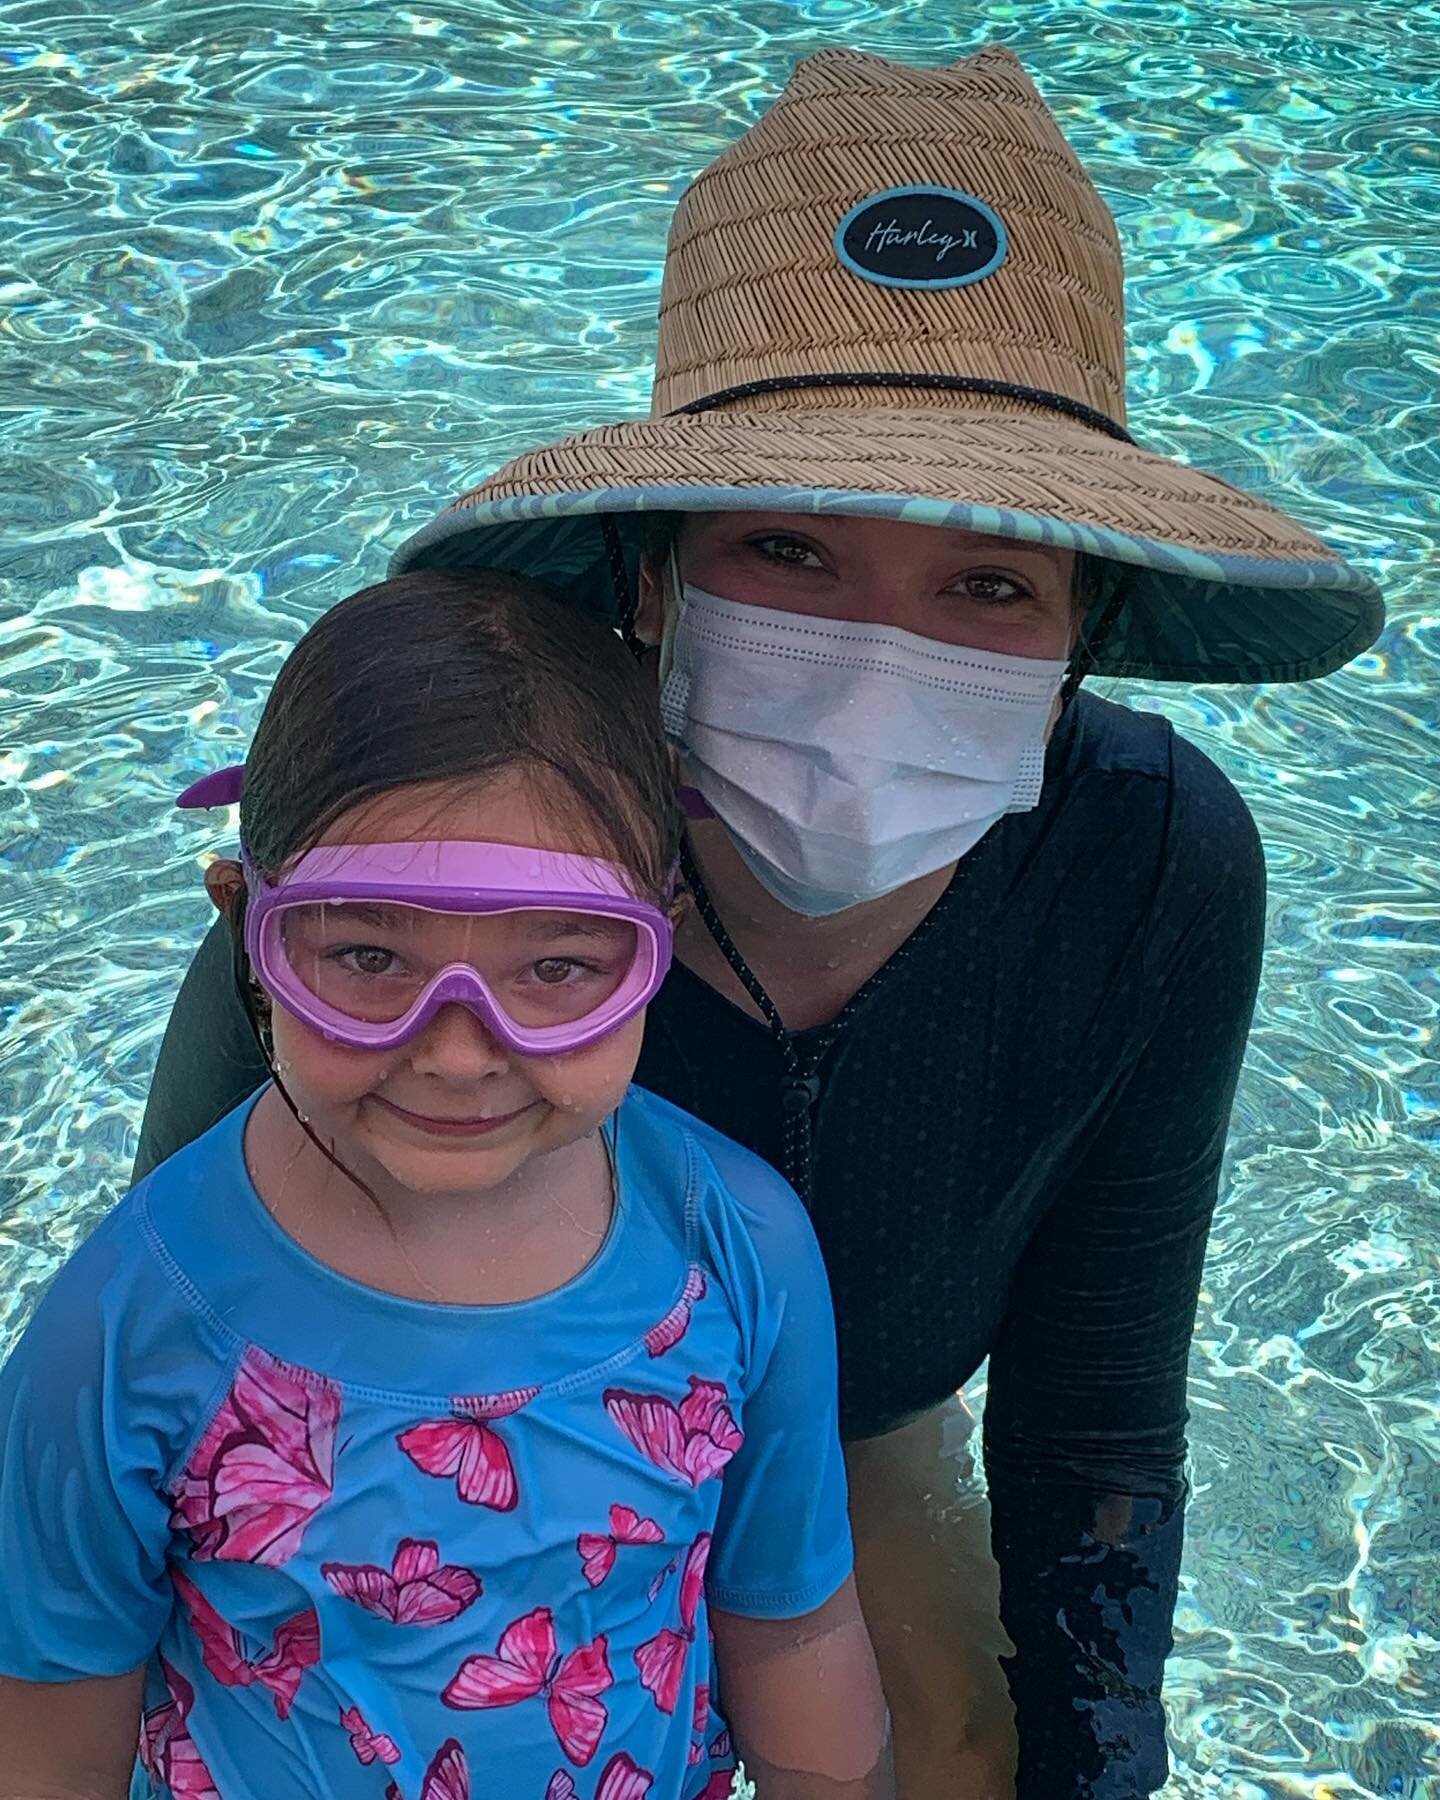 This 5 year old rockstar just finished up 14 lessons with teacher Kristine. She learned how to swim then do freestyle, backstroke and breaststroke! 🏊🏼&zwj;♀️ #aquabuddiesla #summerswim #swimlessons #watersafety #swimteamready #amazing #summer #memo